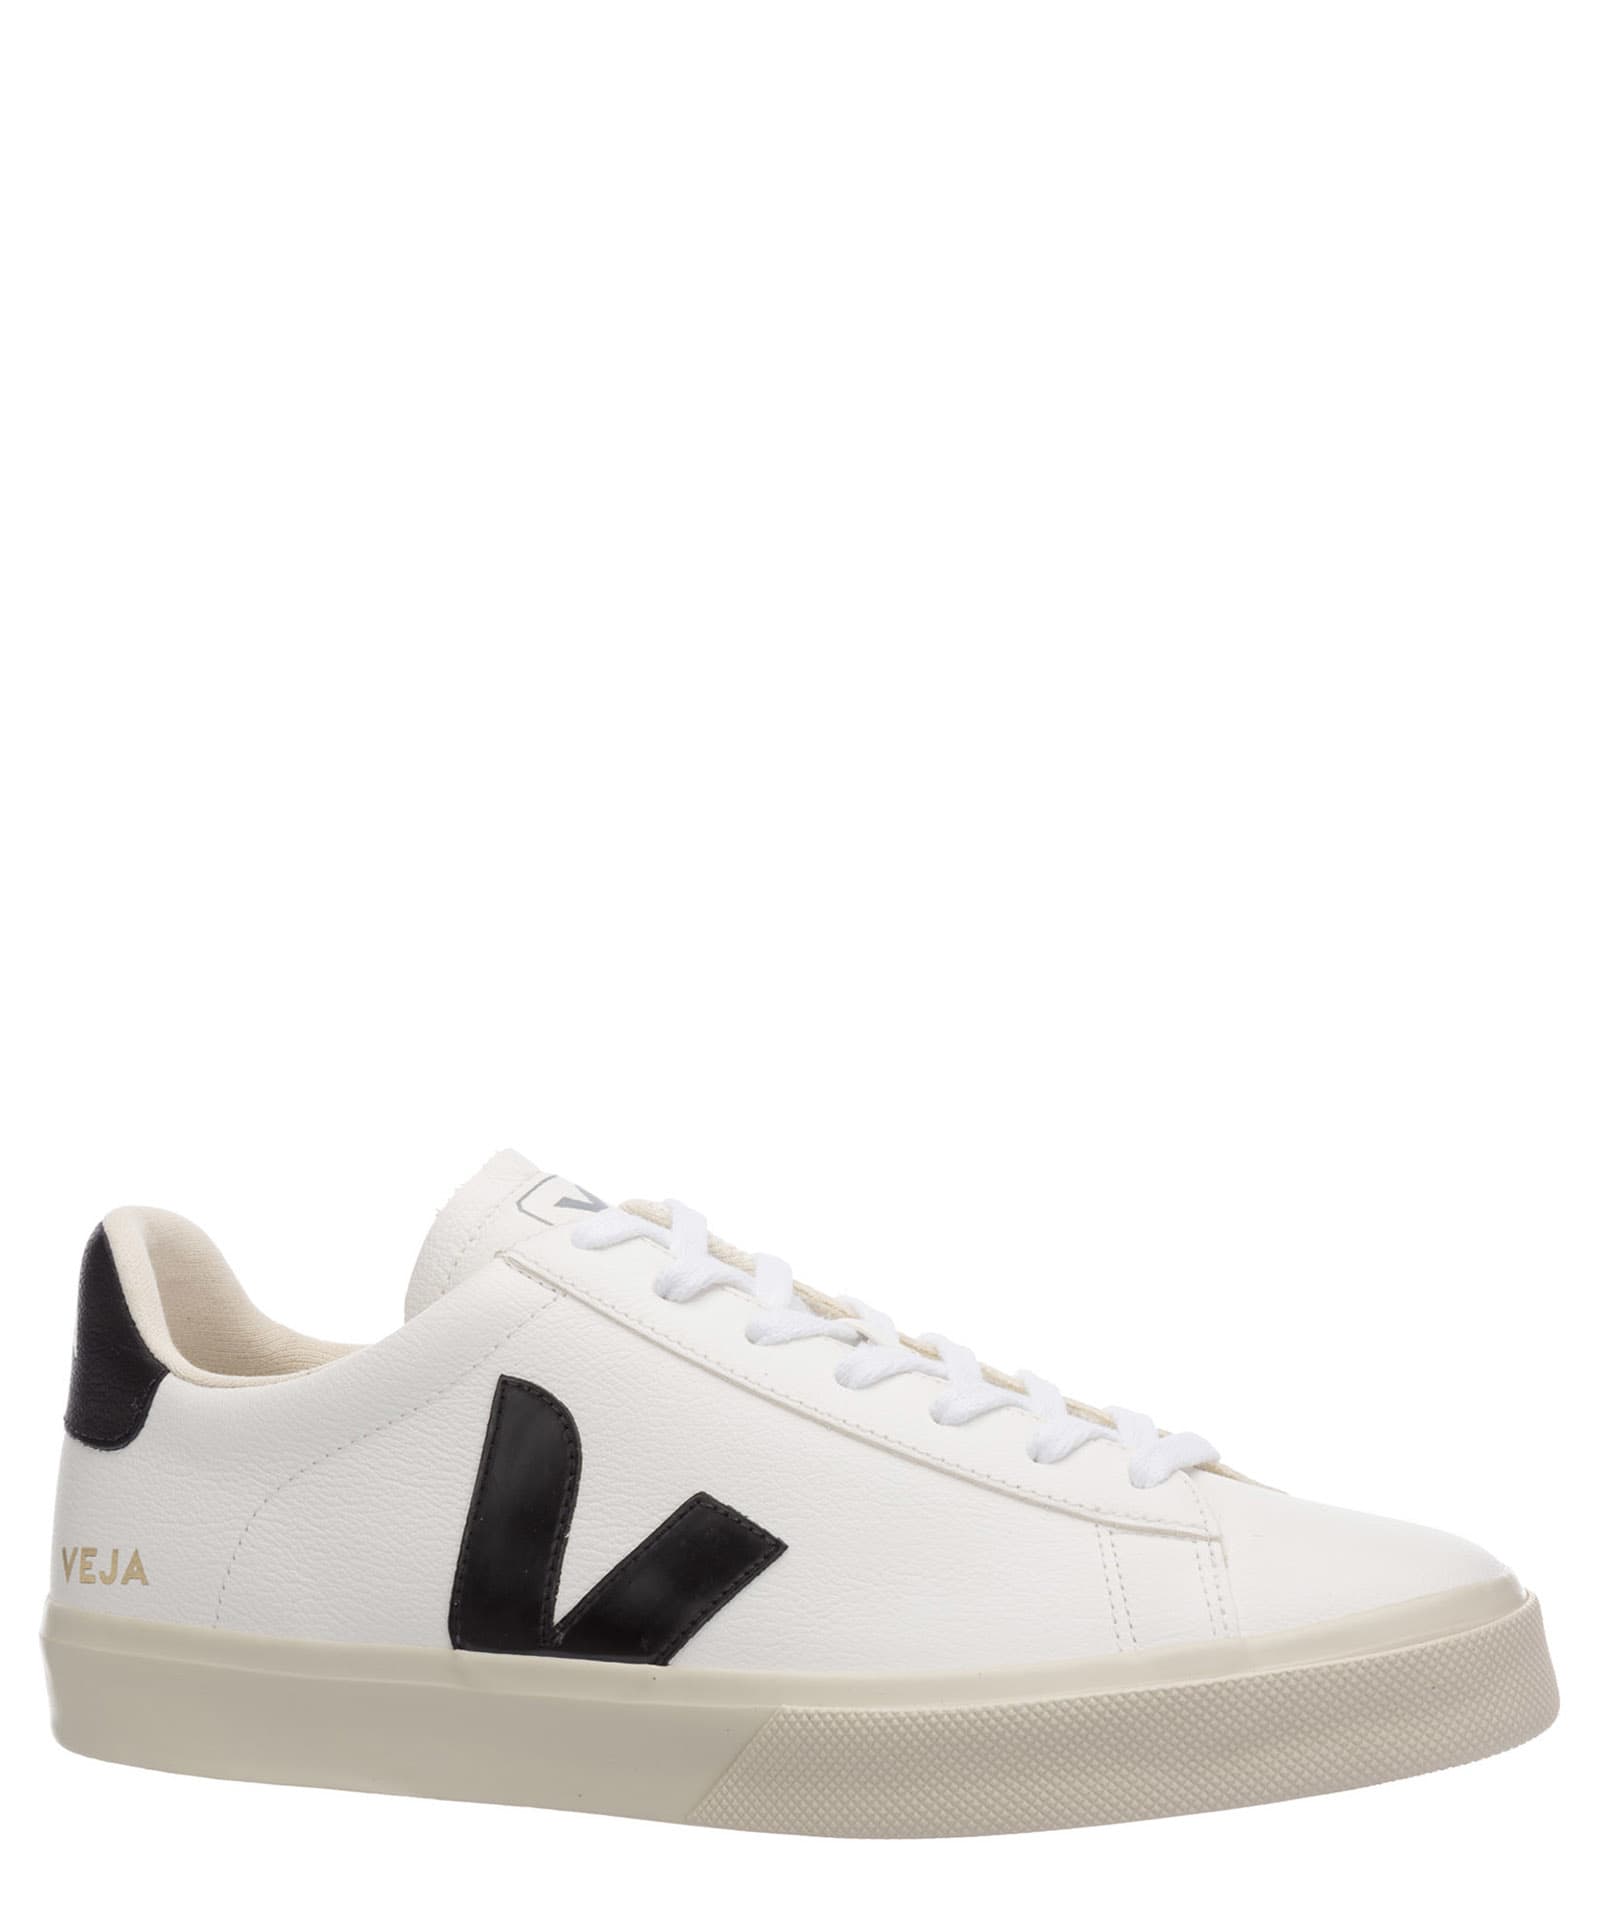 Shop Veja Campo Leather Sneakers In White/black